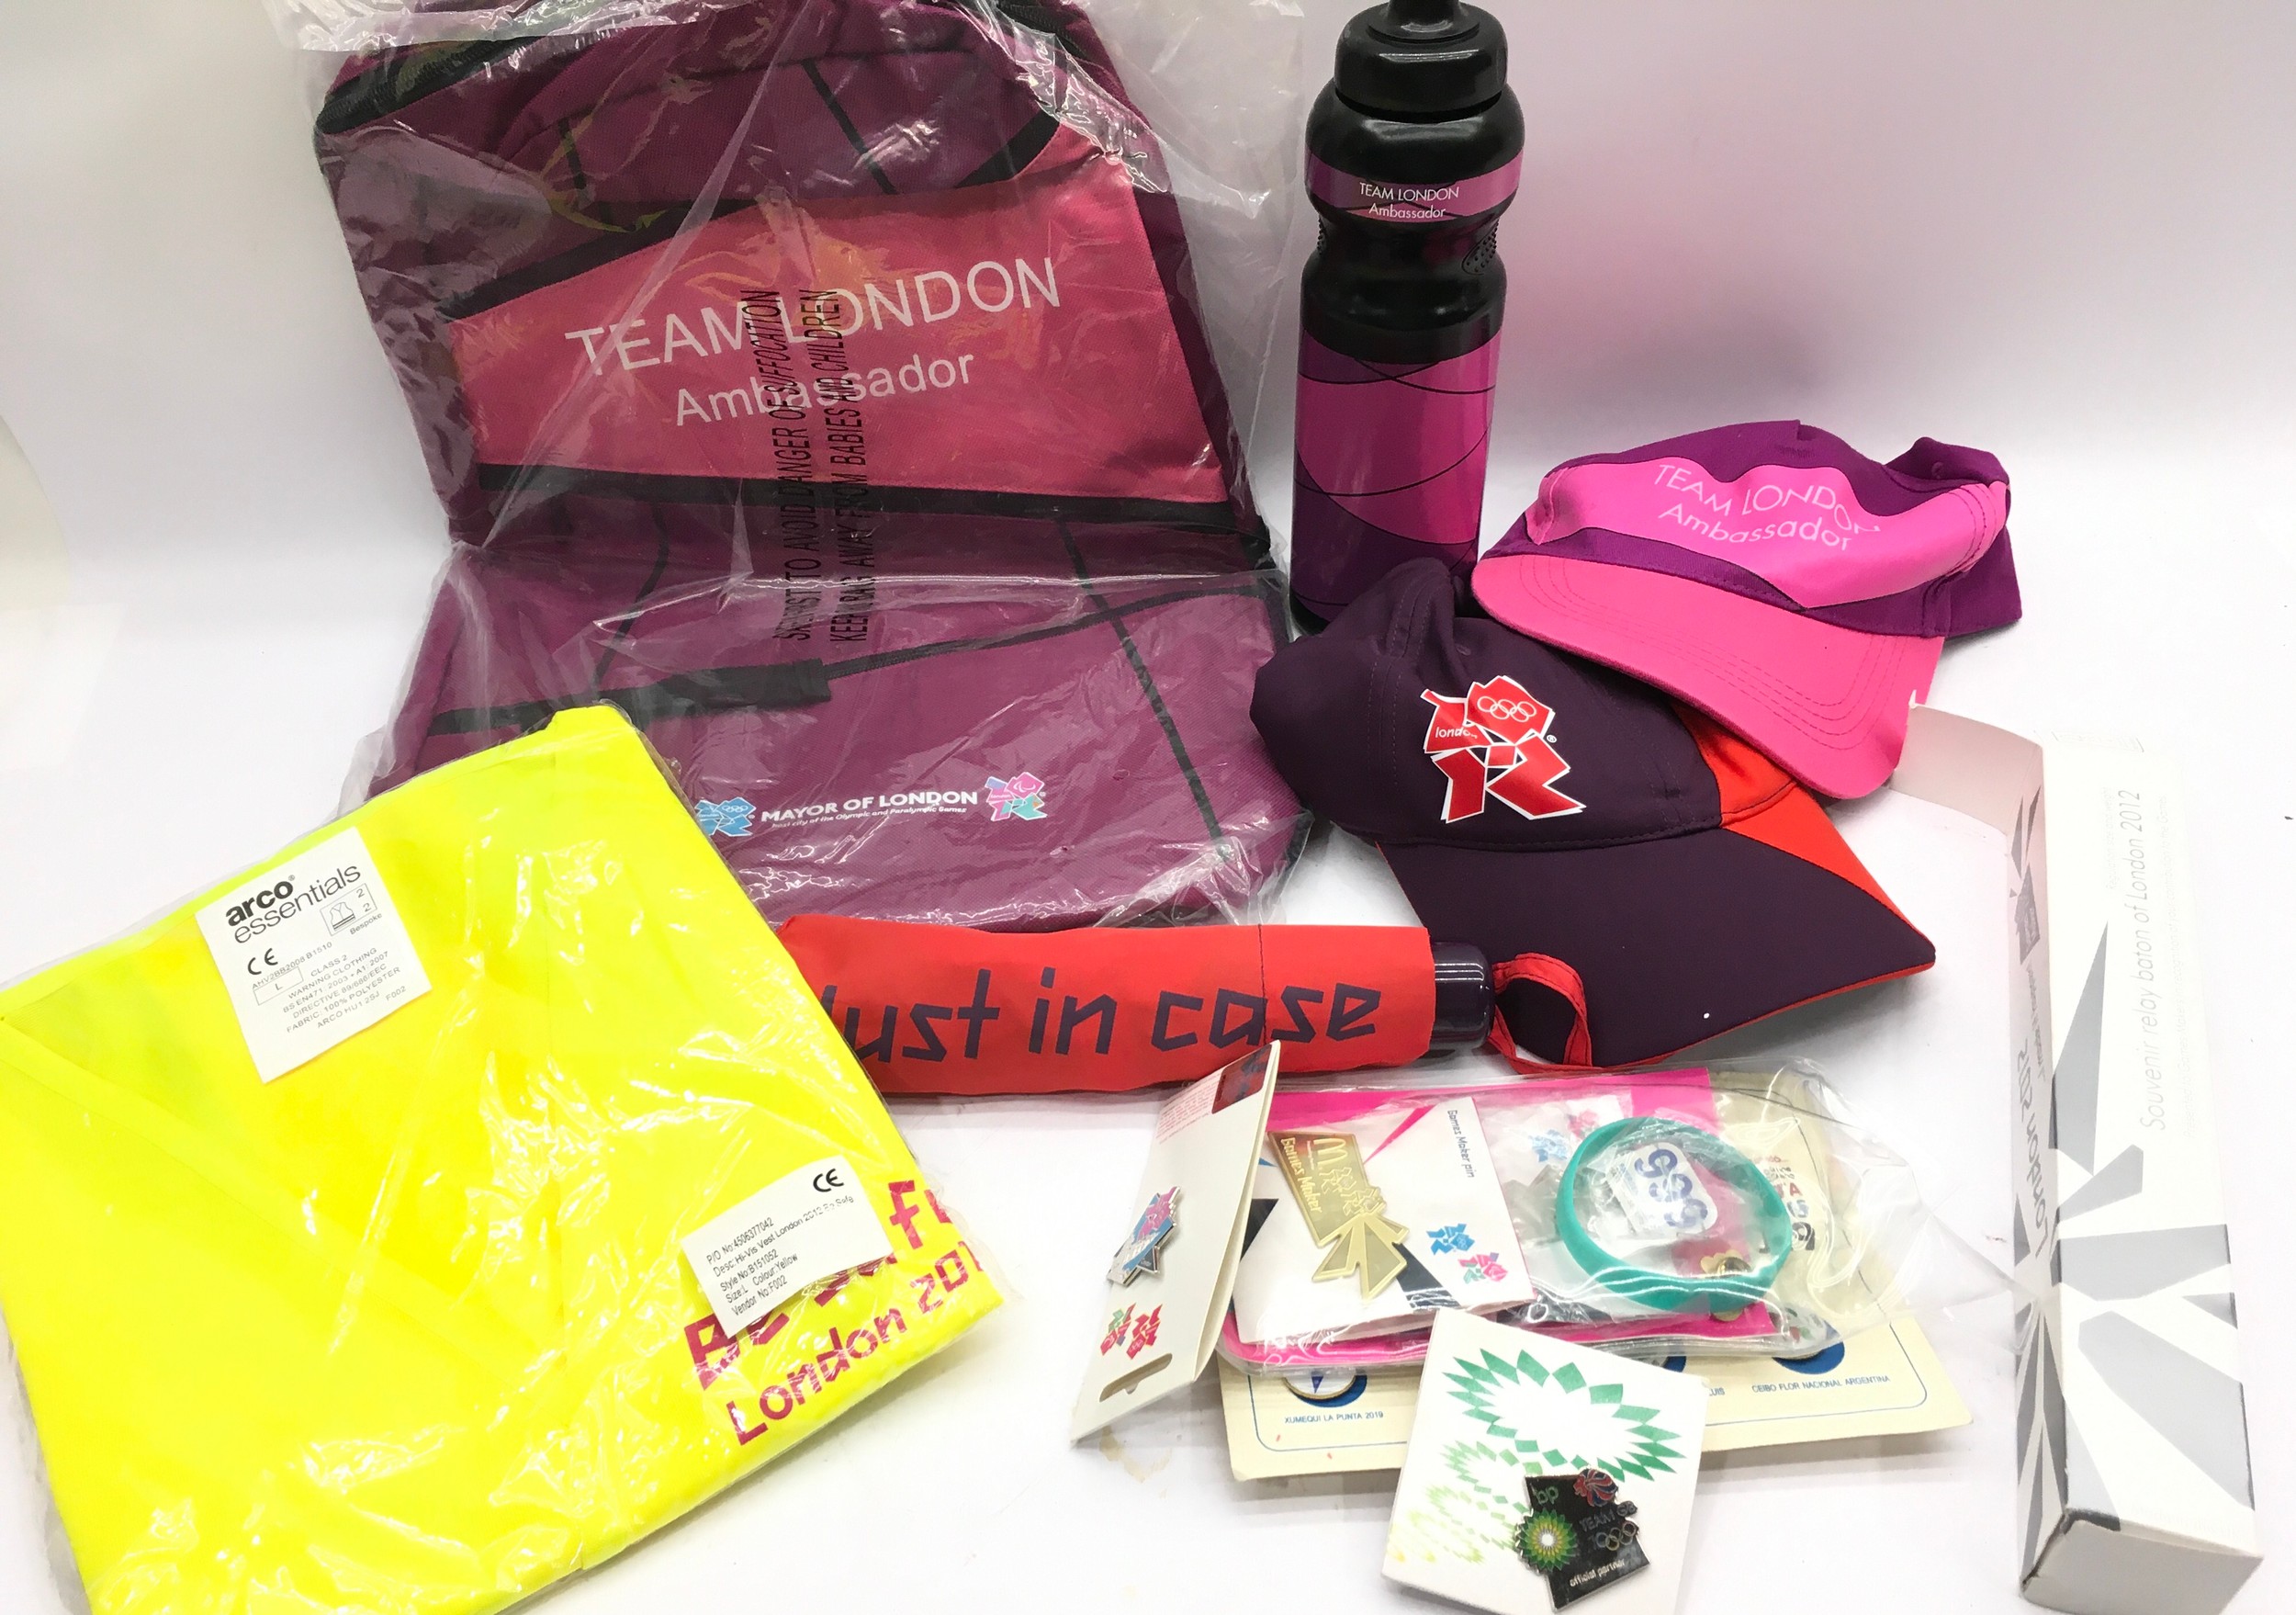 Collection of London 2012 Olympics Gamesmaker/Ambassador issued kit and other souvenir items to